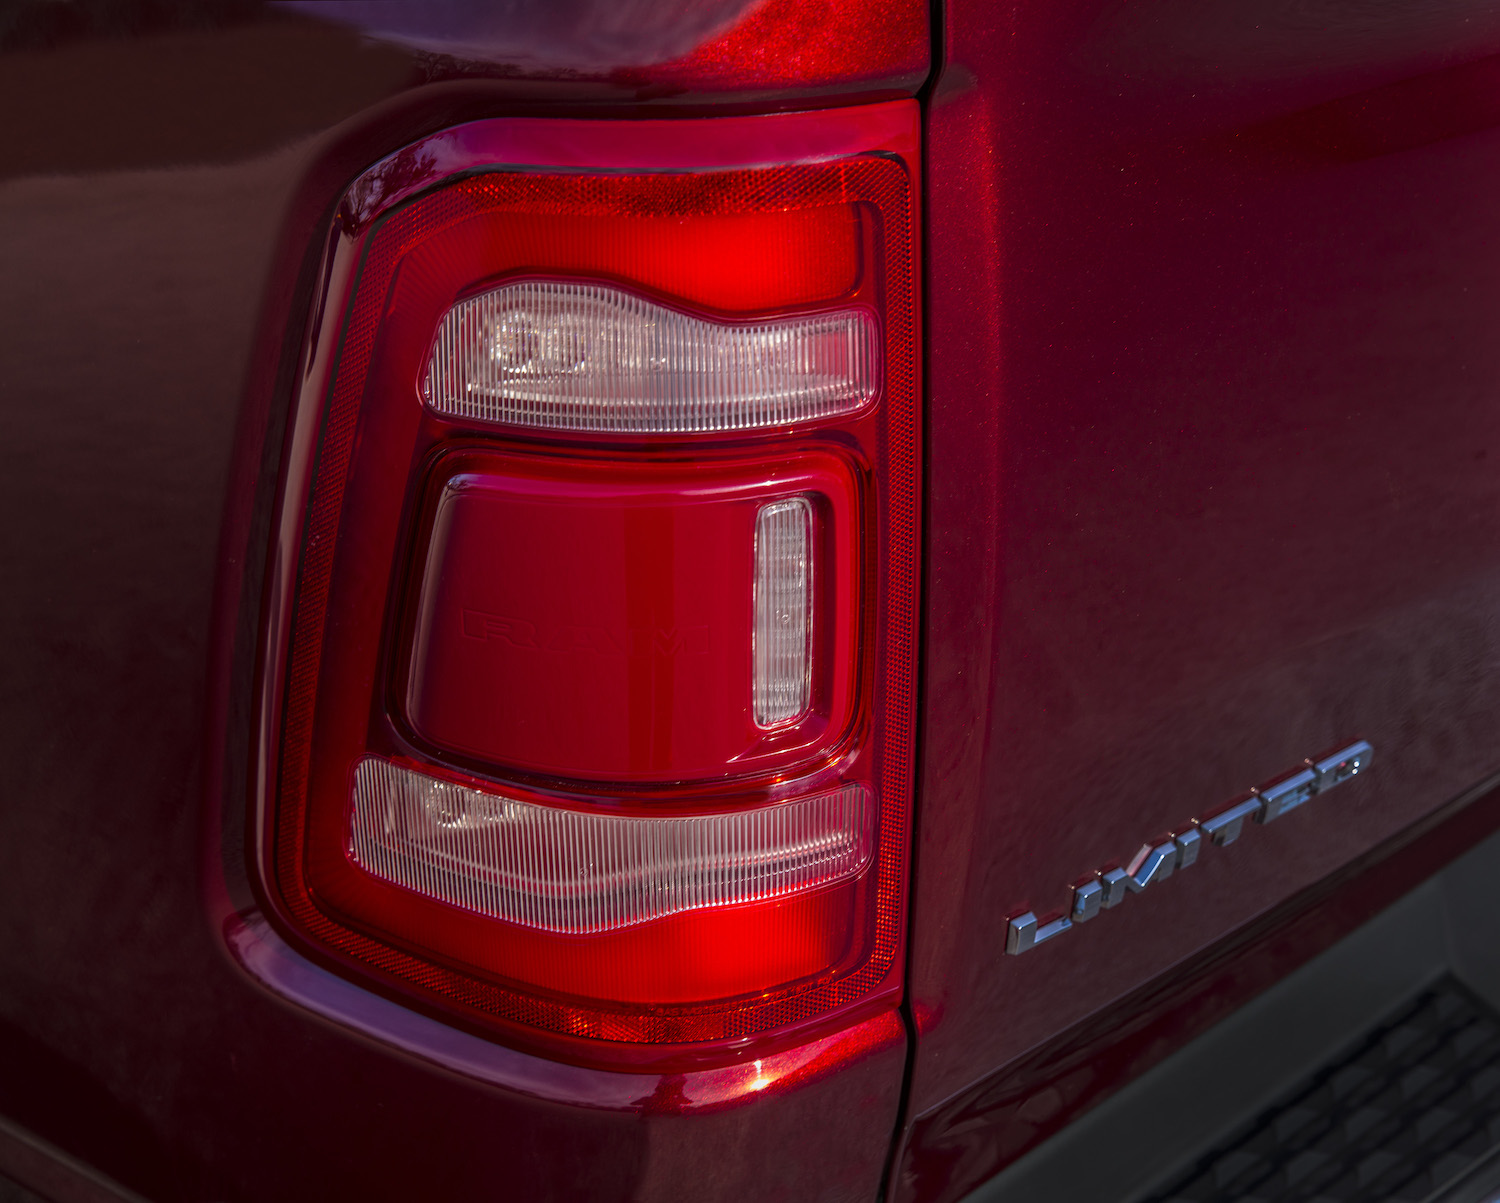 Detail shot of the taillight of a red 2022 pickup truck.